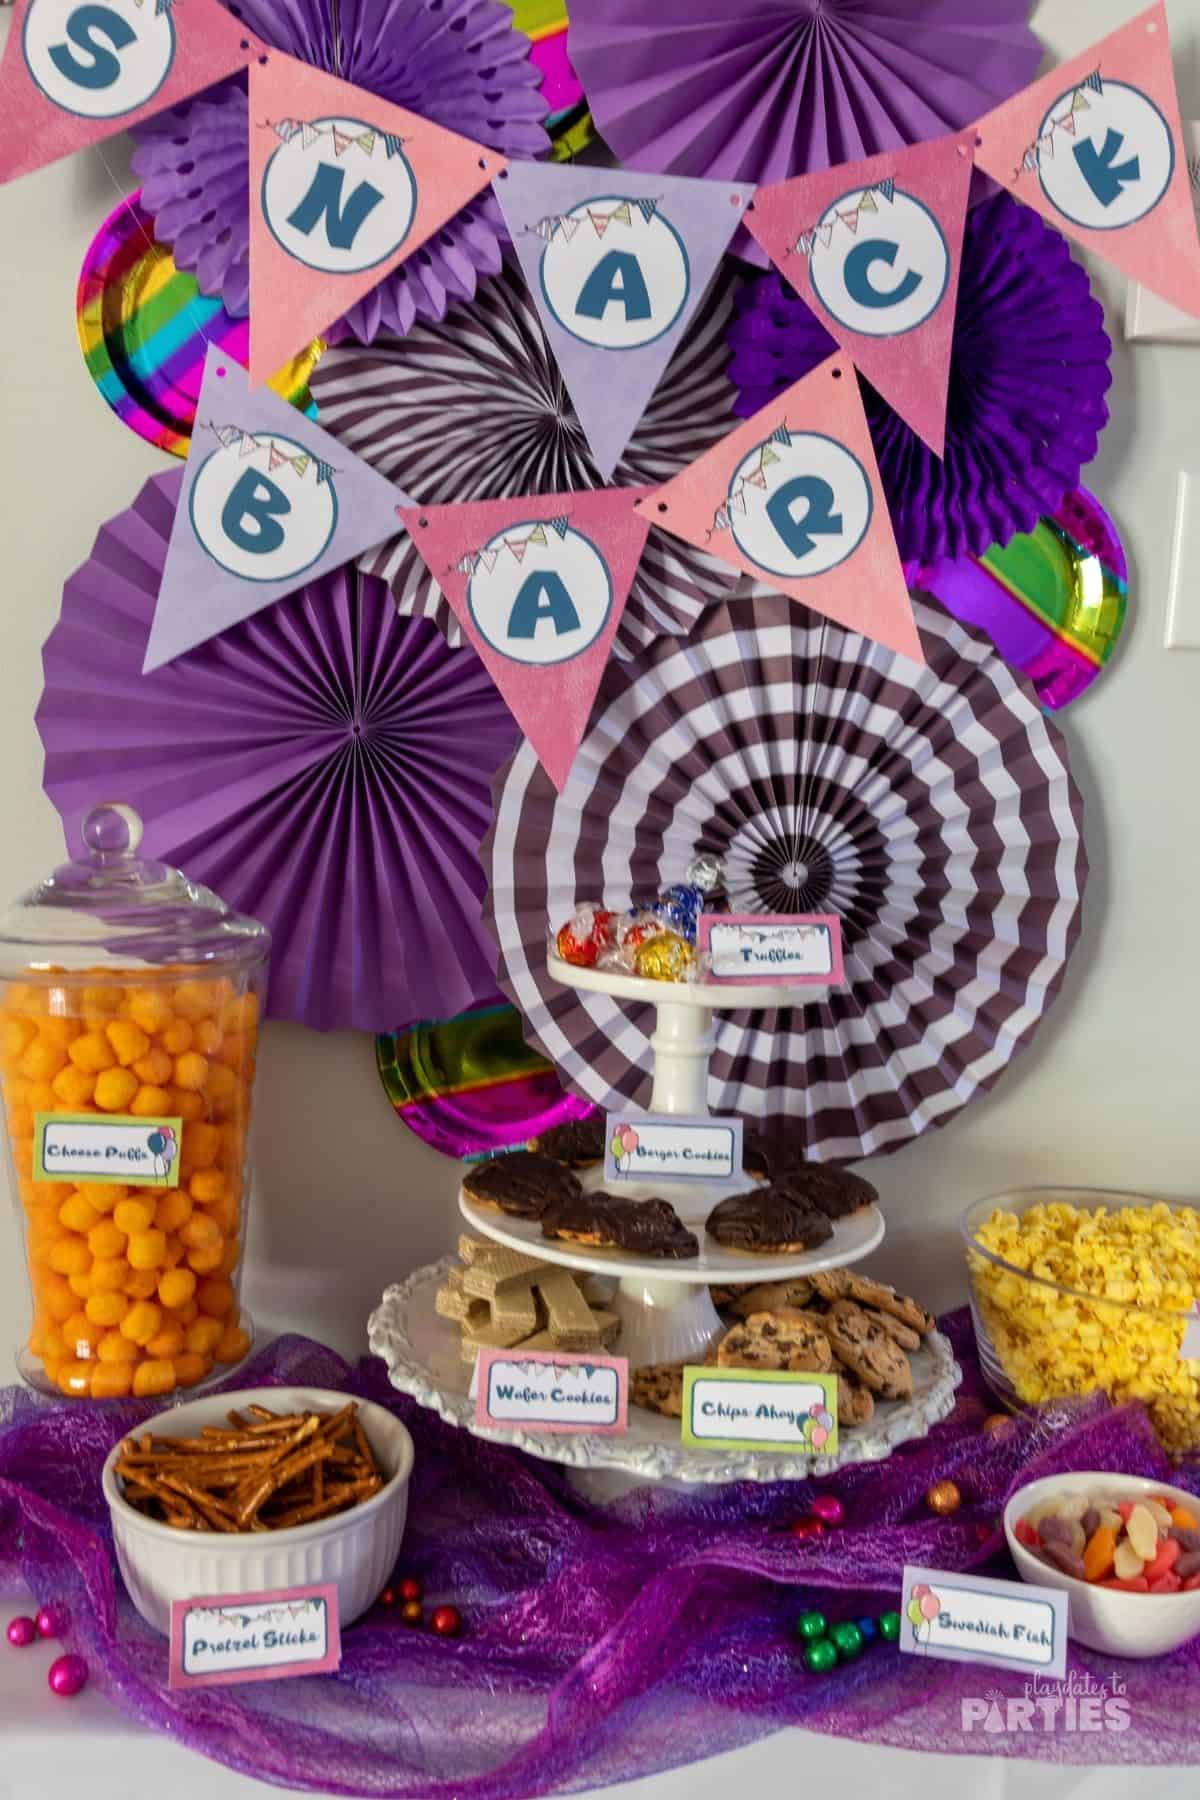 A snack bar with purple and white paper fans, and a pink and purple banner.